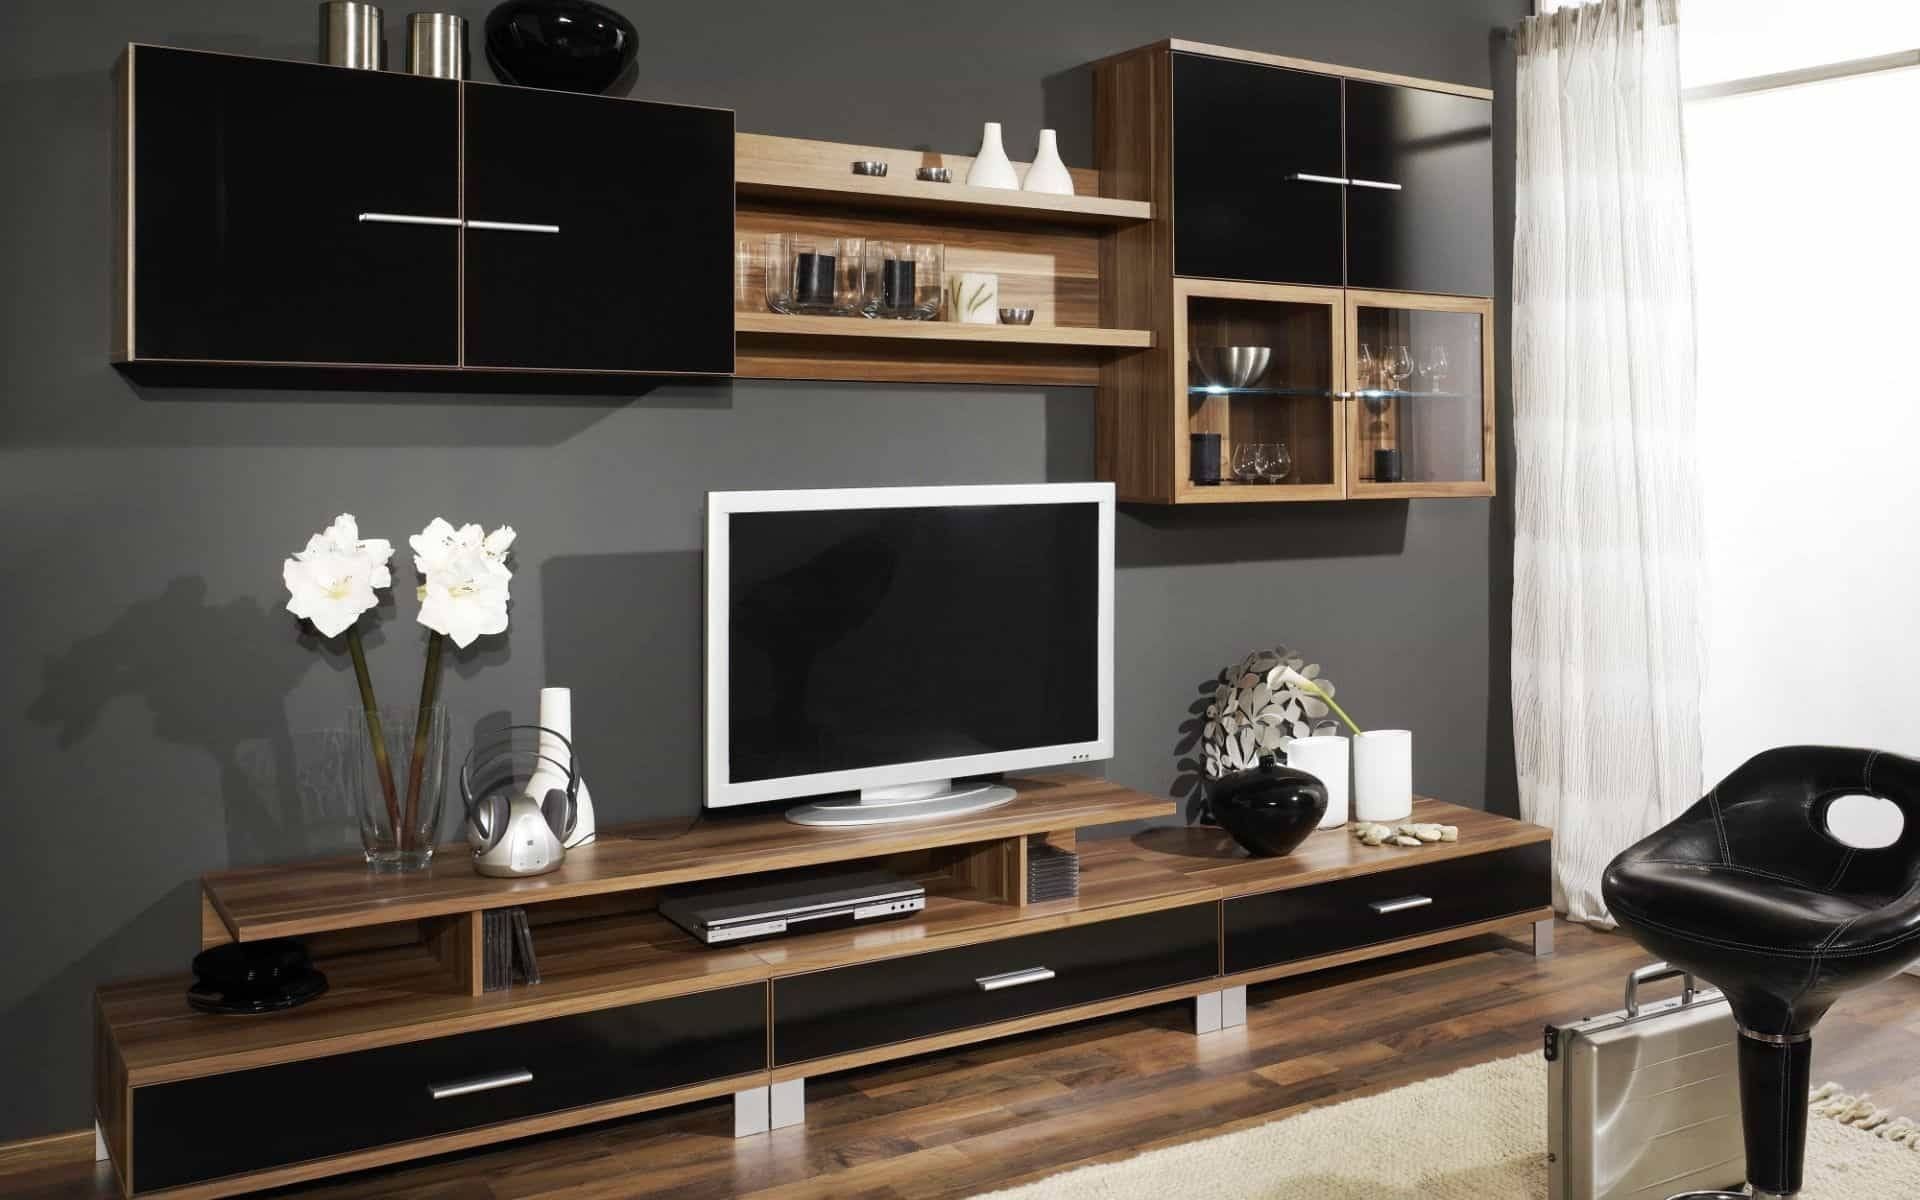 Amazing Freestanding Tv Stand And Glass Shelves – Useful And With Freestanding Tv Stands (View 10 of 15)